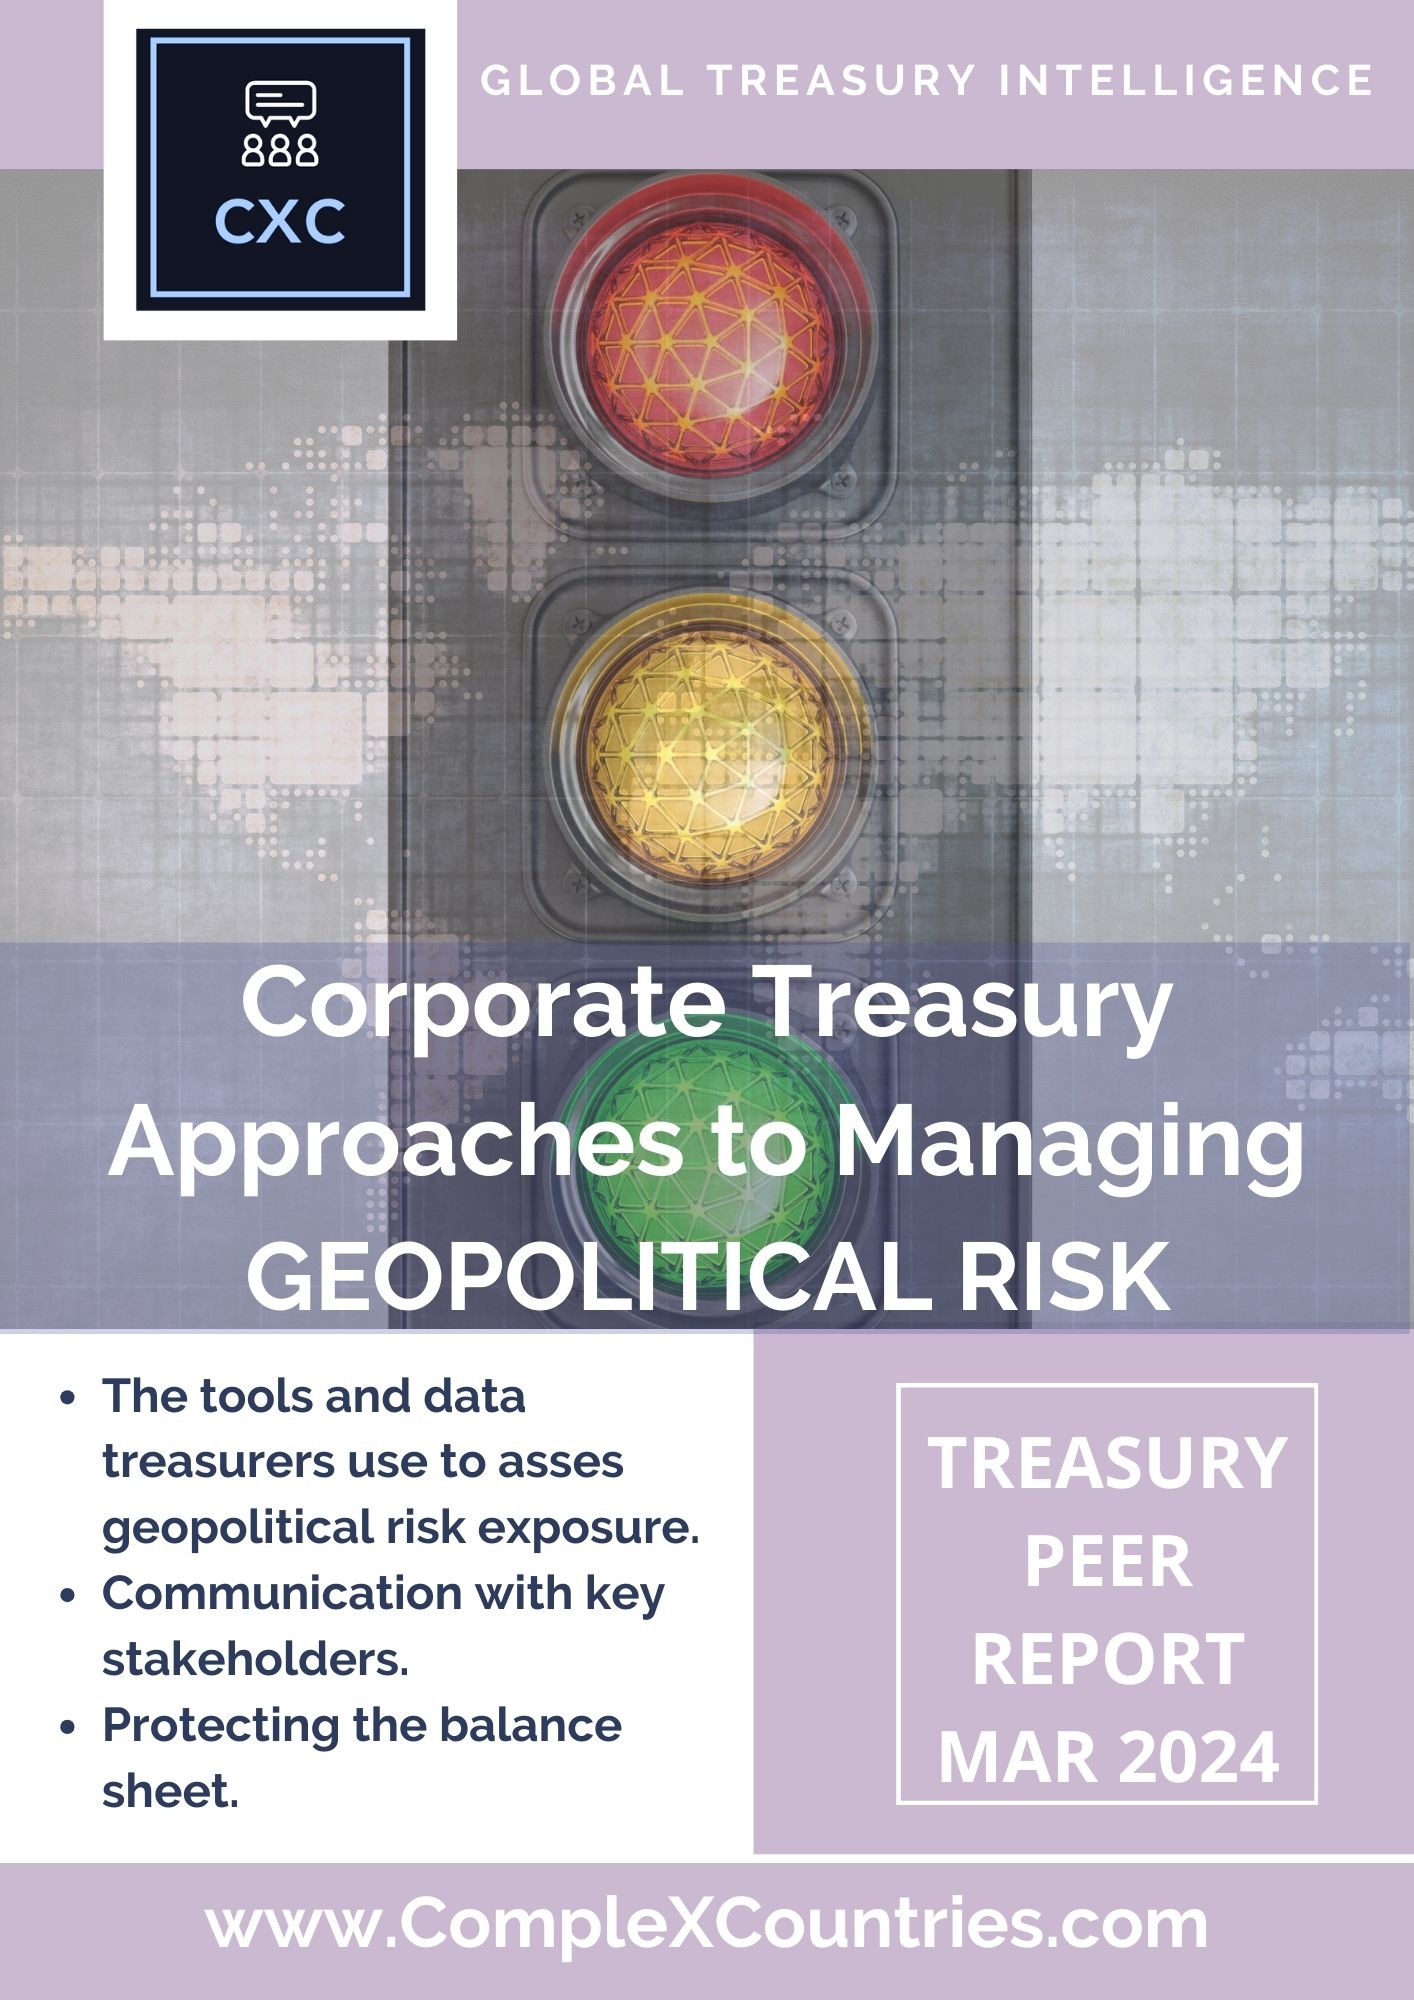 Corporate Treasury Approaches to Managing Geopolitical Risk